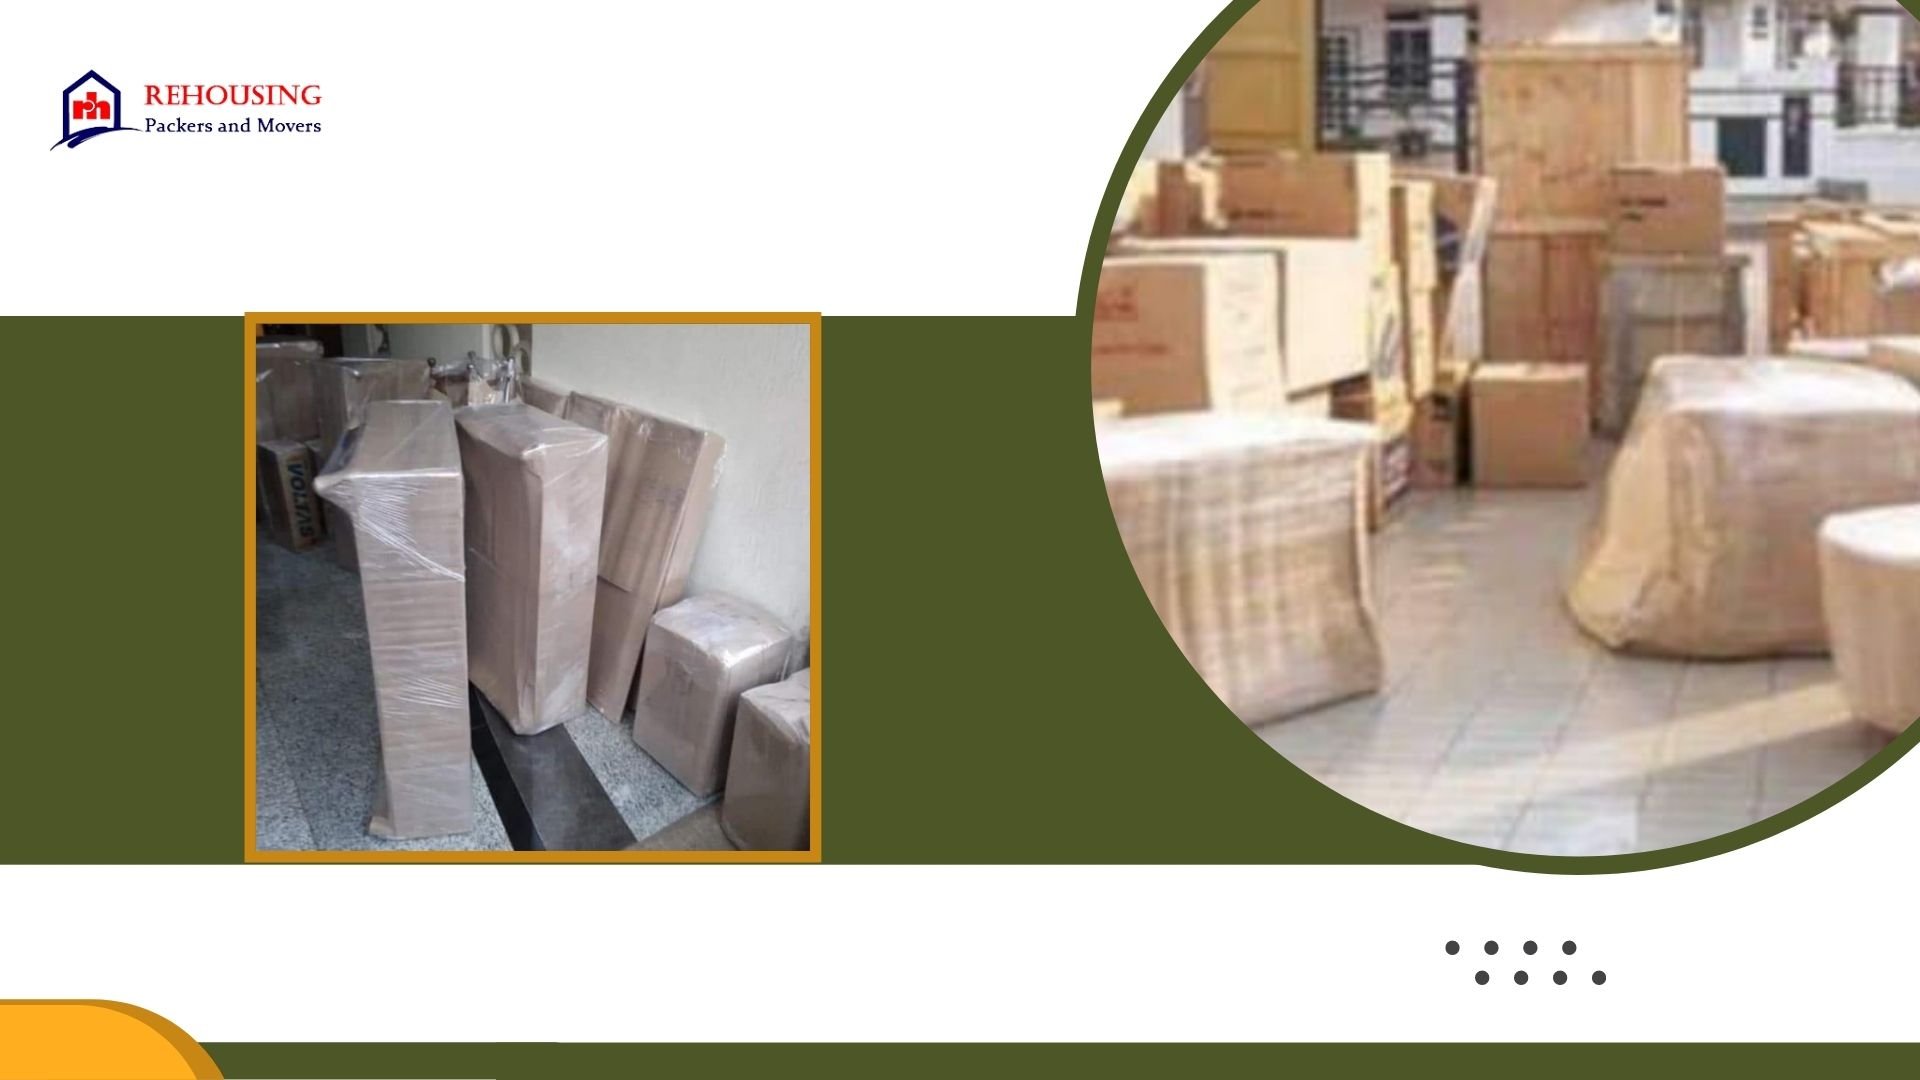 Packers and Movers from Ahmedabad to Jaipur Cost